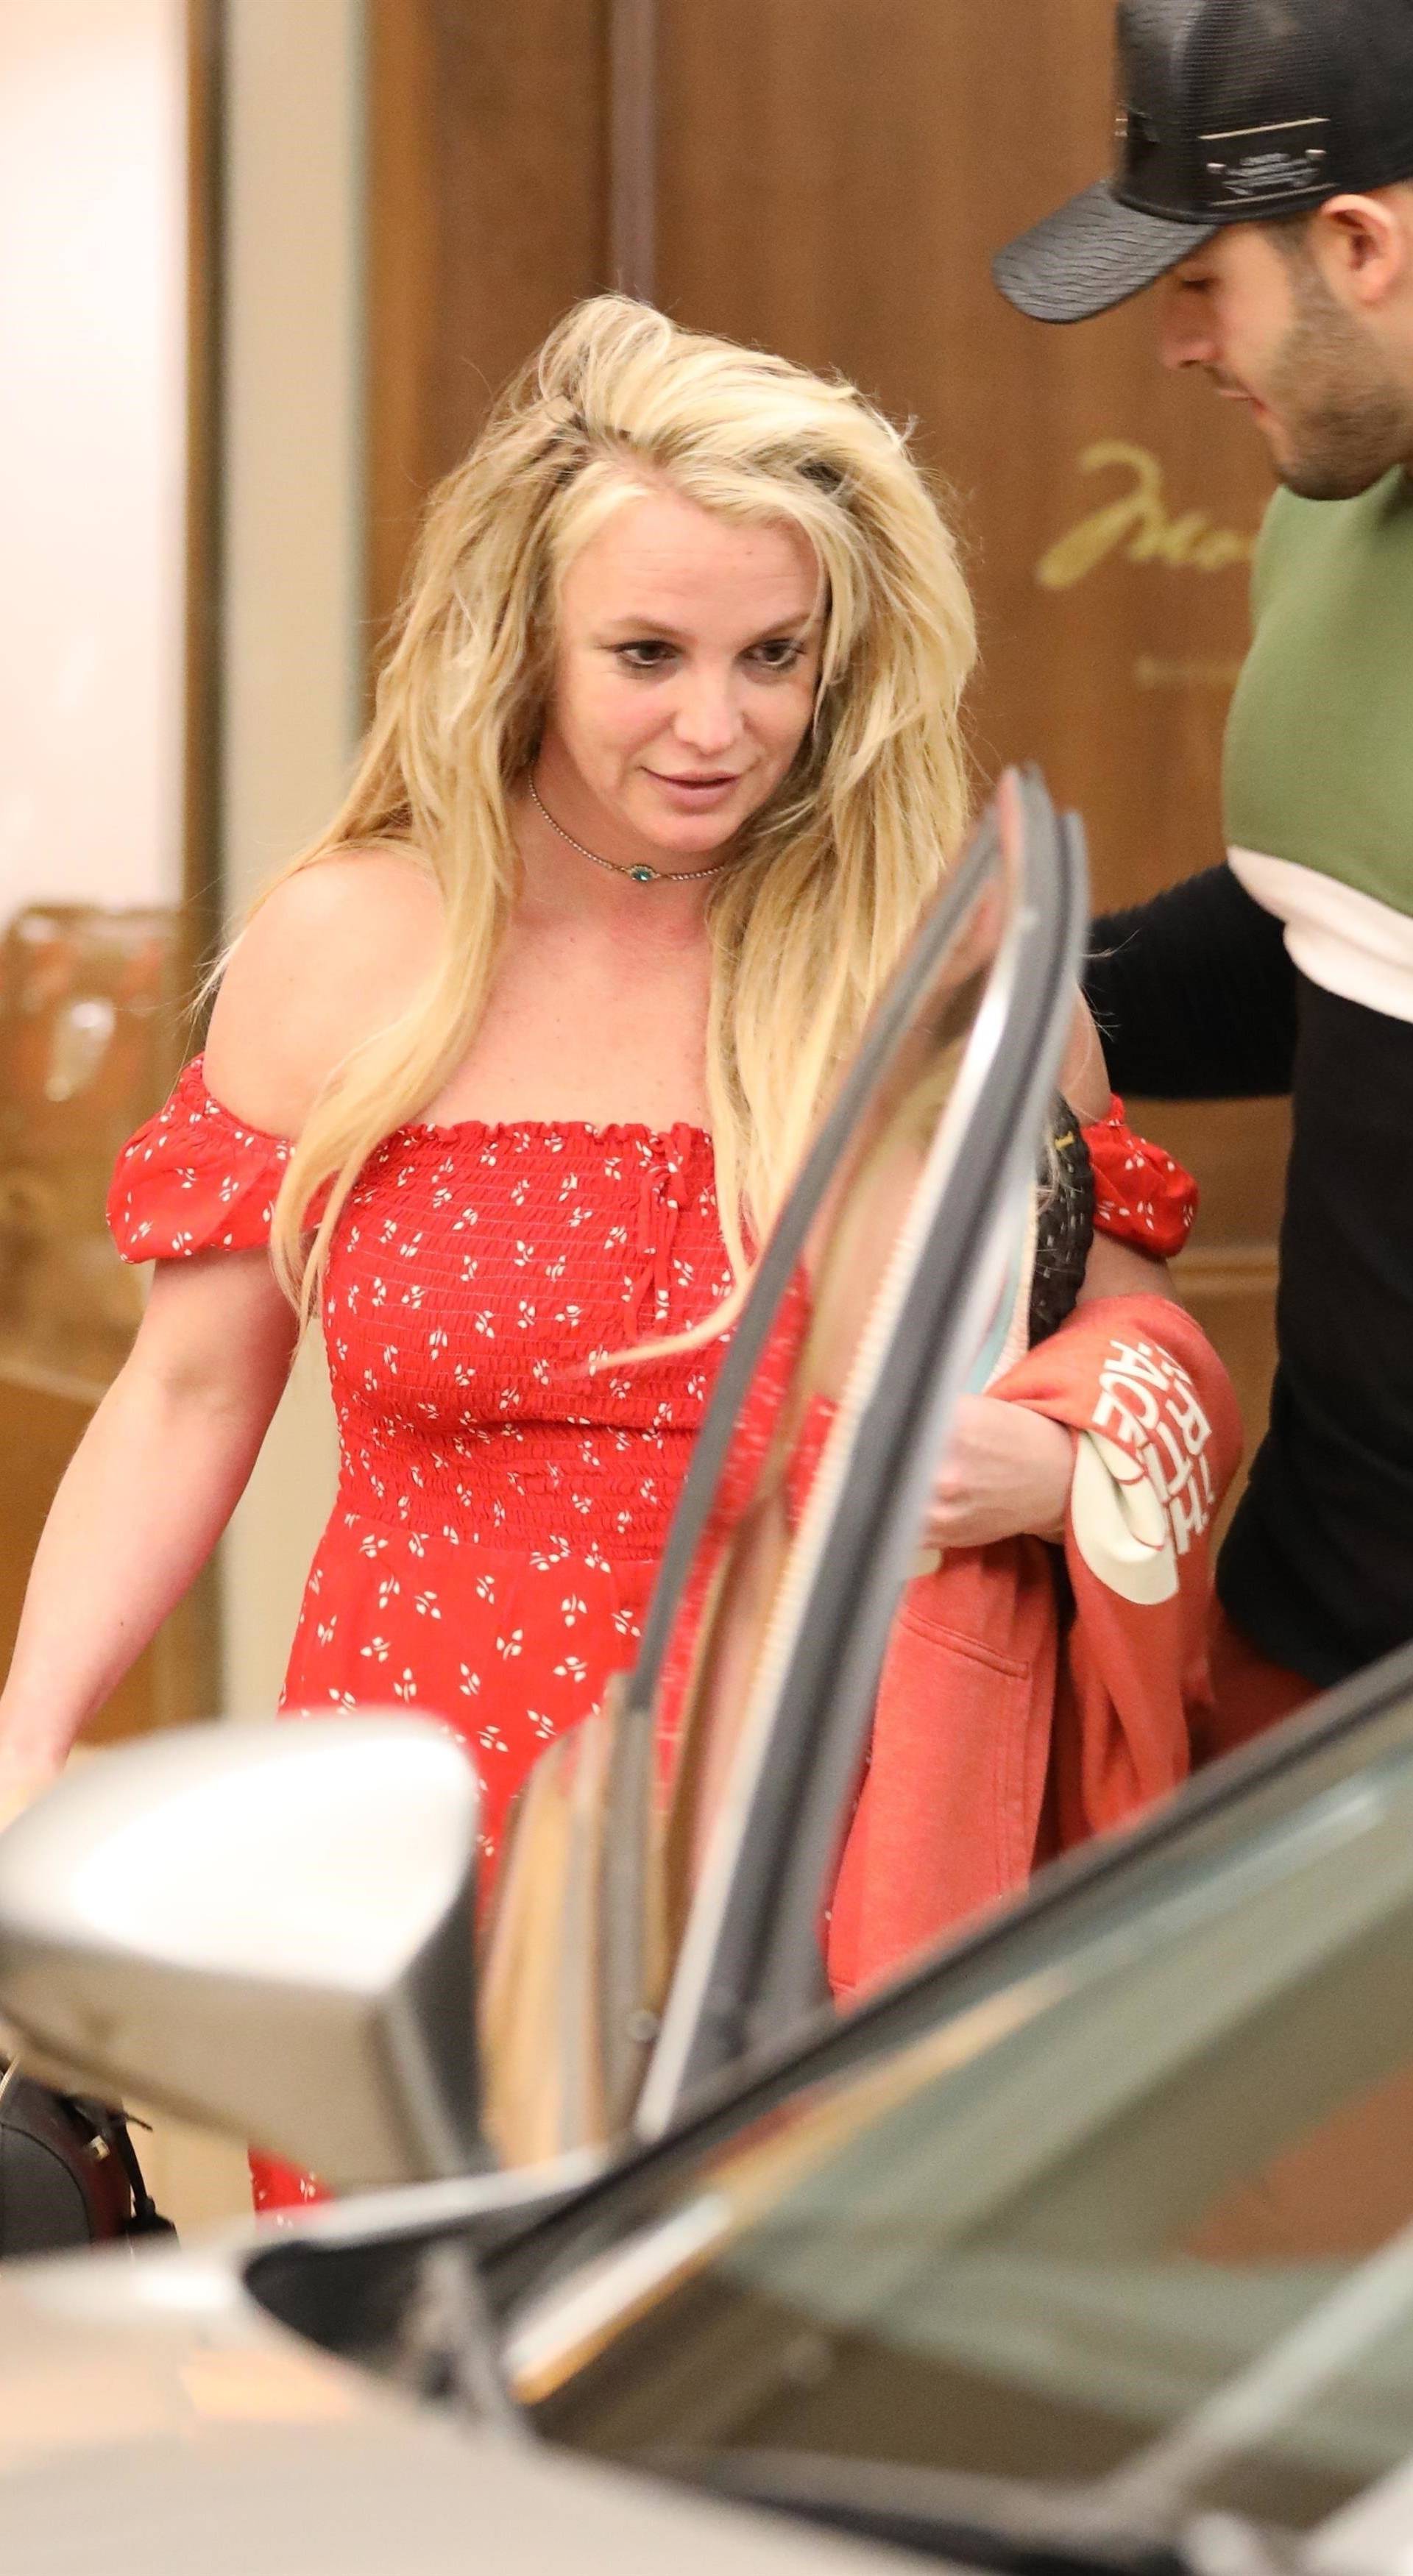 *PREMIUM-EXCLUSIVE* Britney Spears is seen leaving The Montage hotel in Beverly Hills after a day of indulgences